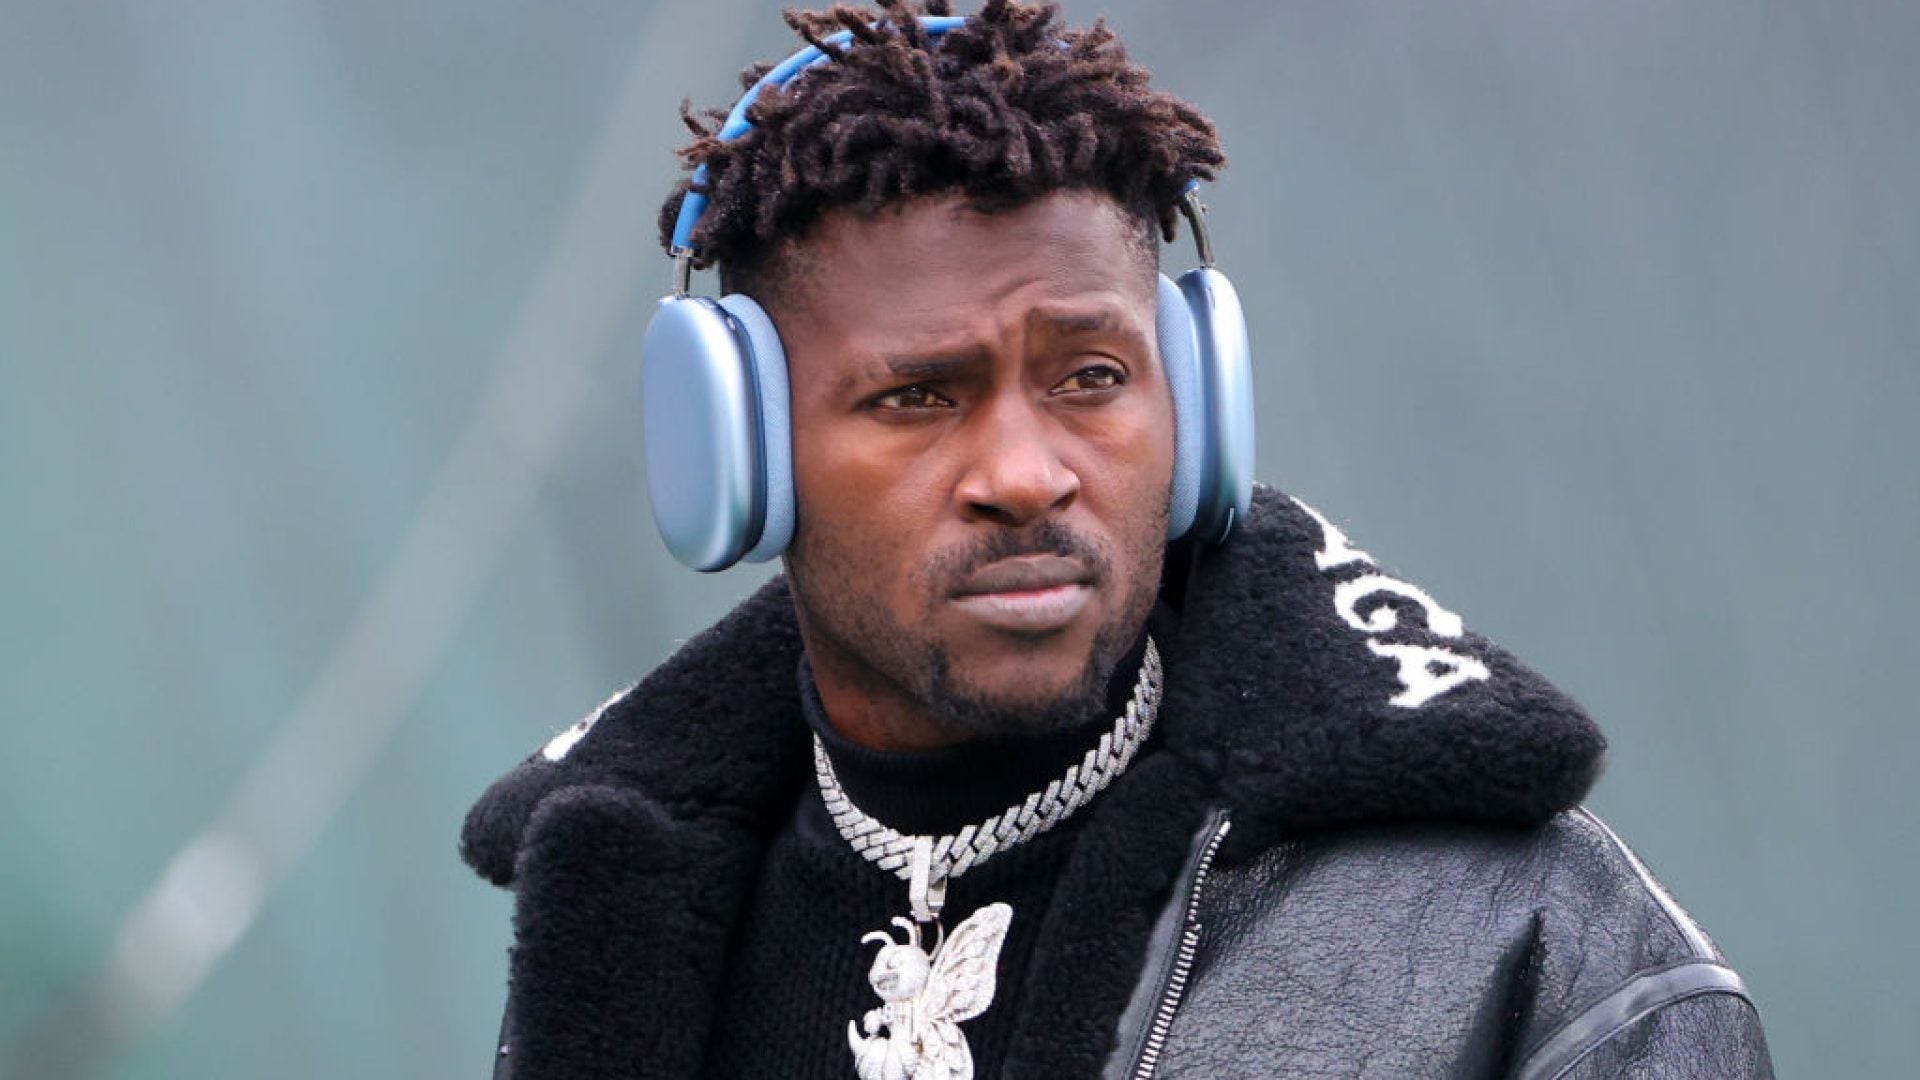 Antonio Brown Announces New Role: President Of Kanye West's DONDA Sports